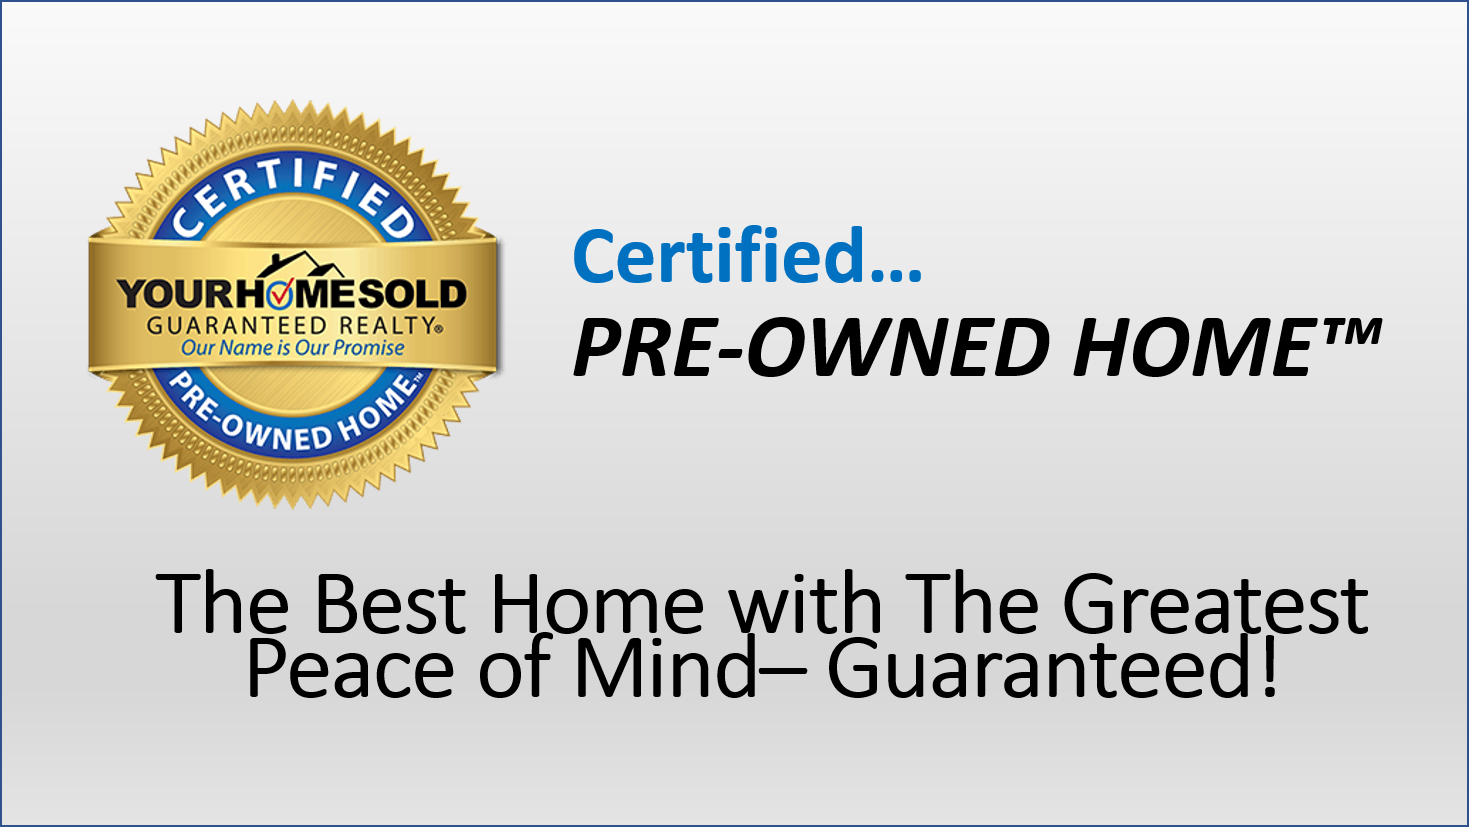 Your-Home-Sold-Guaranteed-Realty-launches-Certified-Pre-Owned-Home™-in-April-2023-to-help-homeowners-Sell-their-Home-Faster-And-For-More-Money-A.png